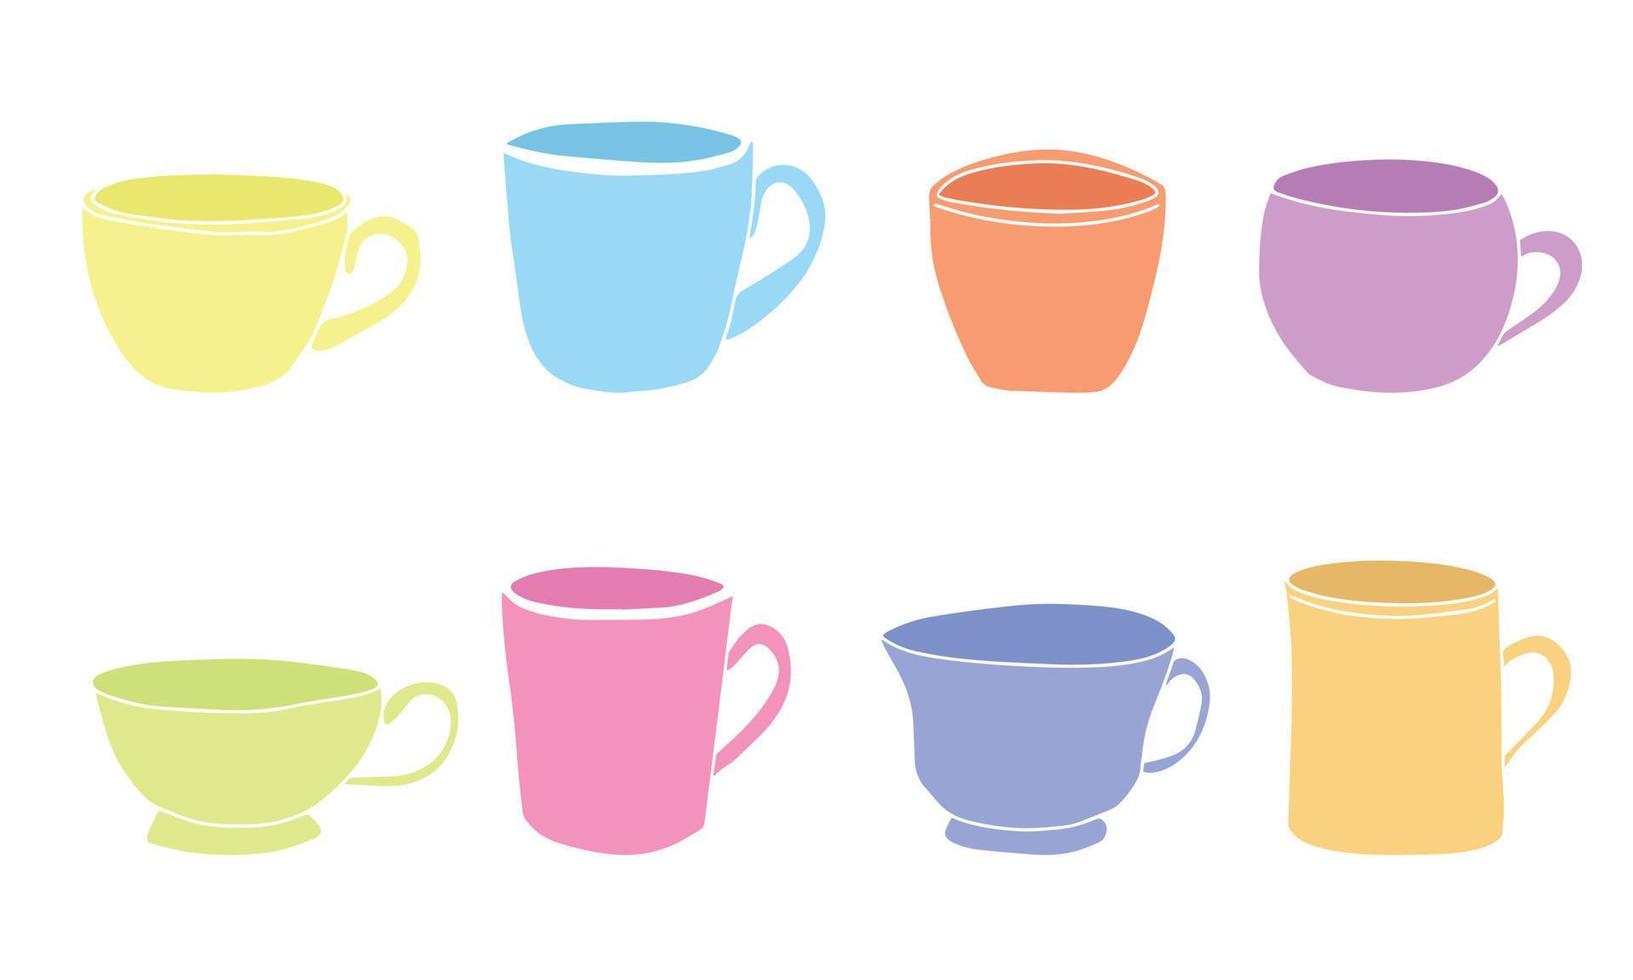 Coffee cup icon set. Cups of coffee tea collection. Hot drink icon. Disposable cup. Flat style - stock vector. vector